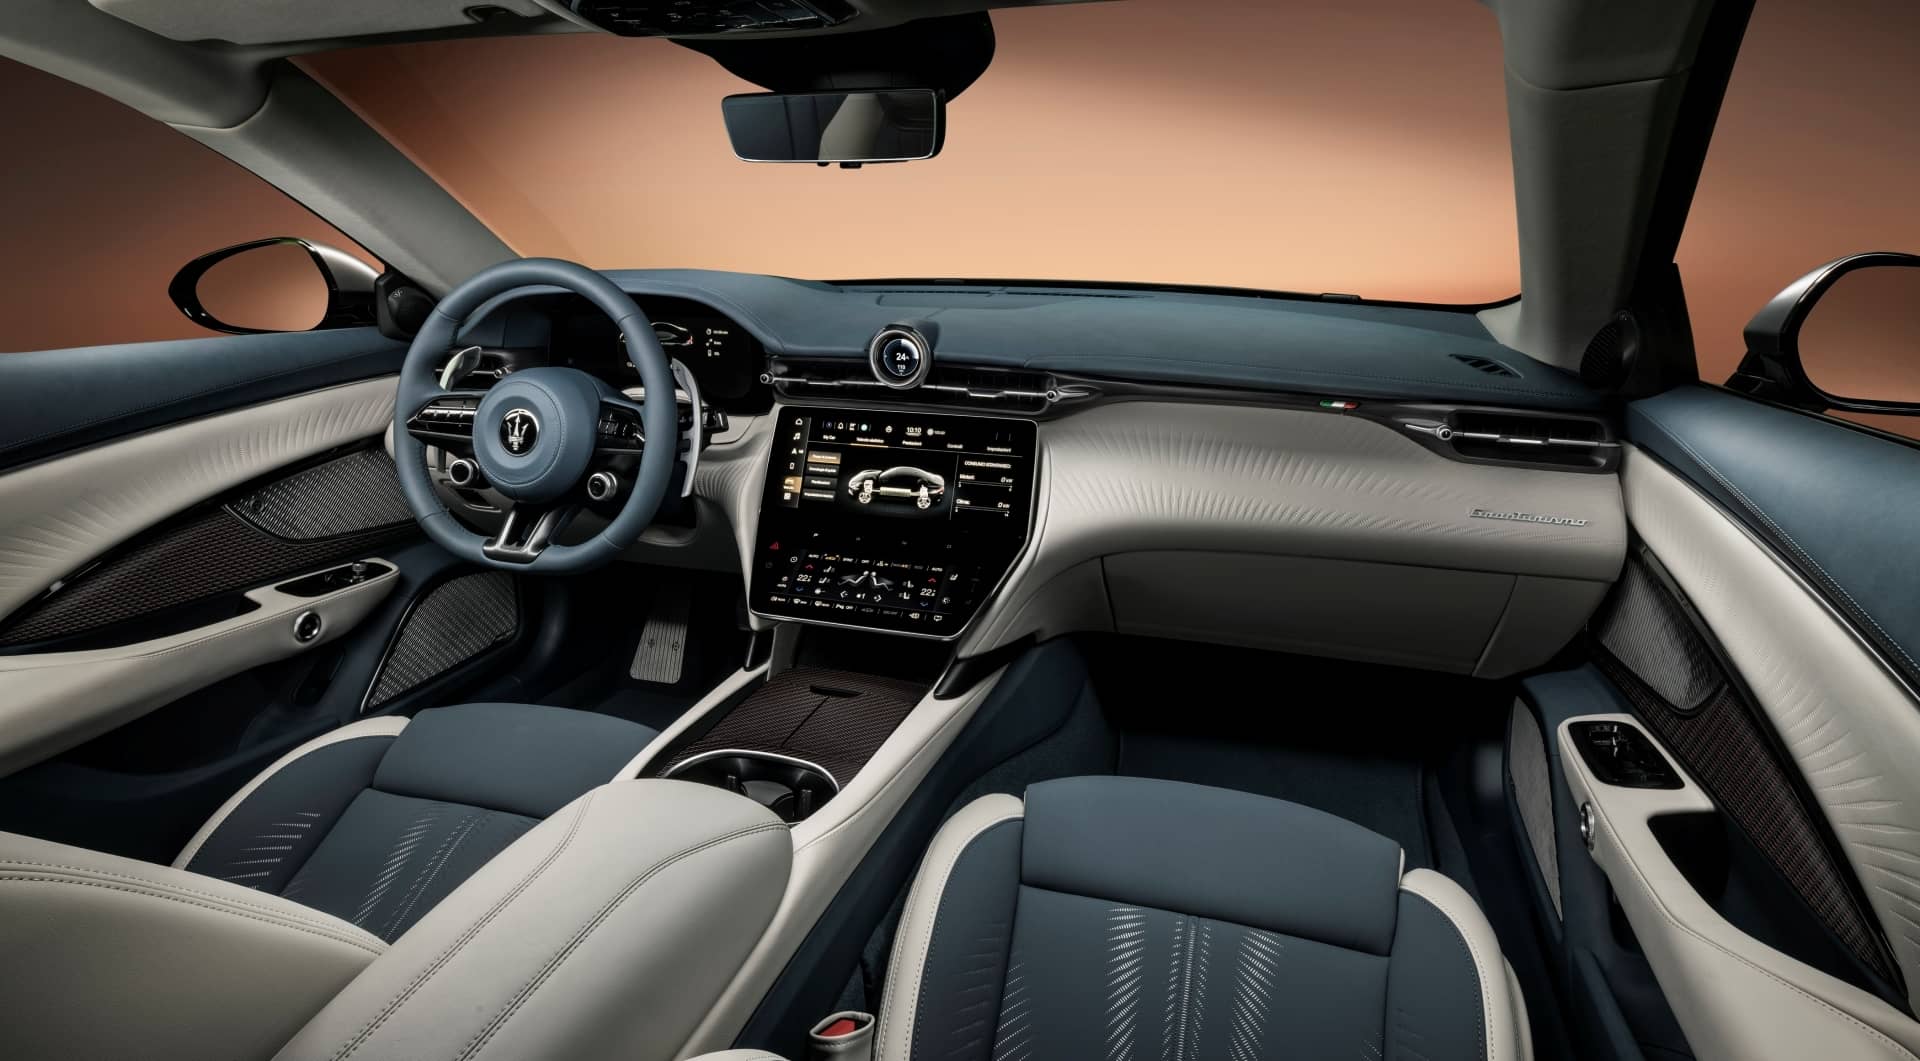 Up to 6 screens, the Maserati GranTurismo reveals its interior and more of its secrets in 108 new images